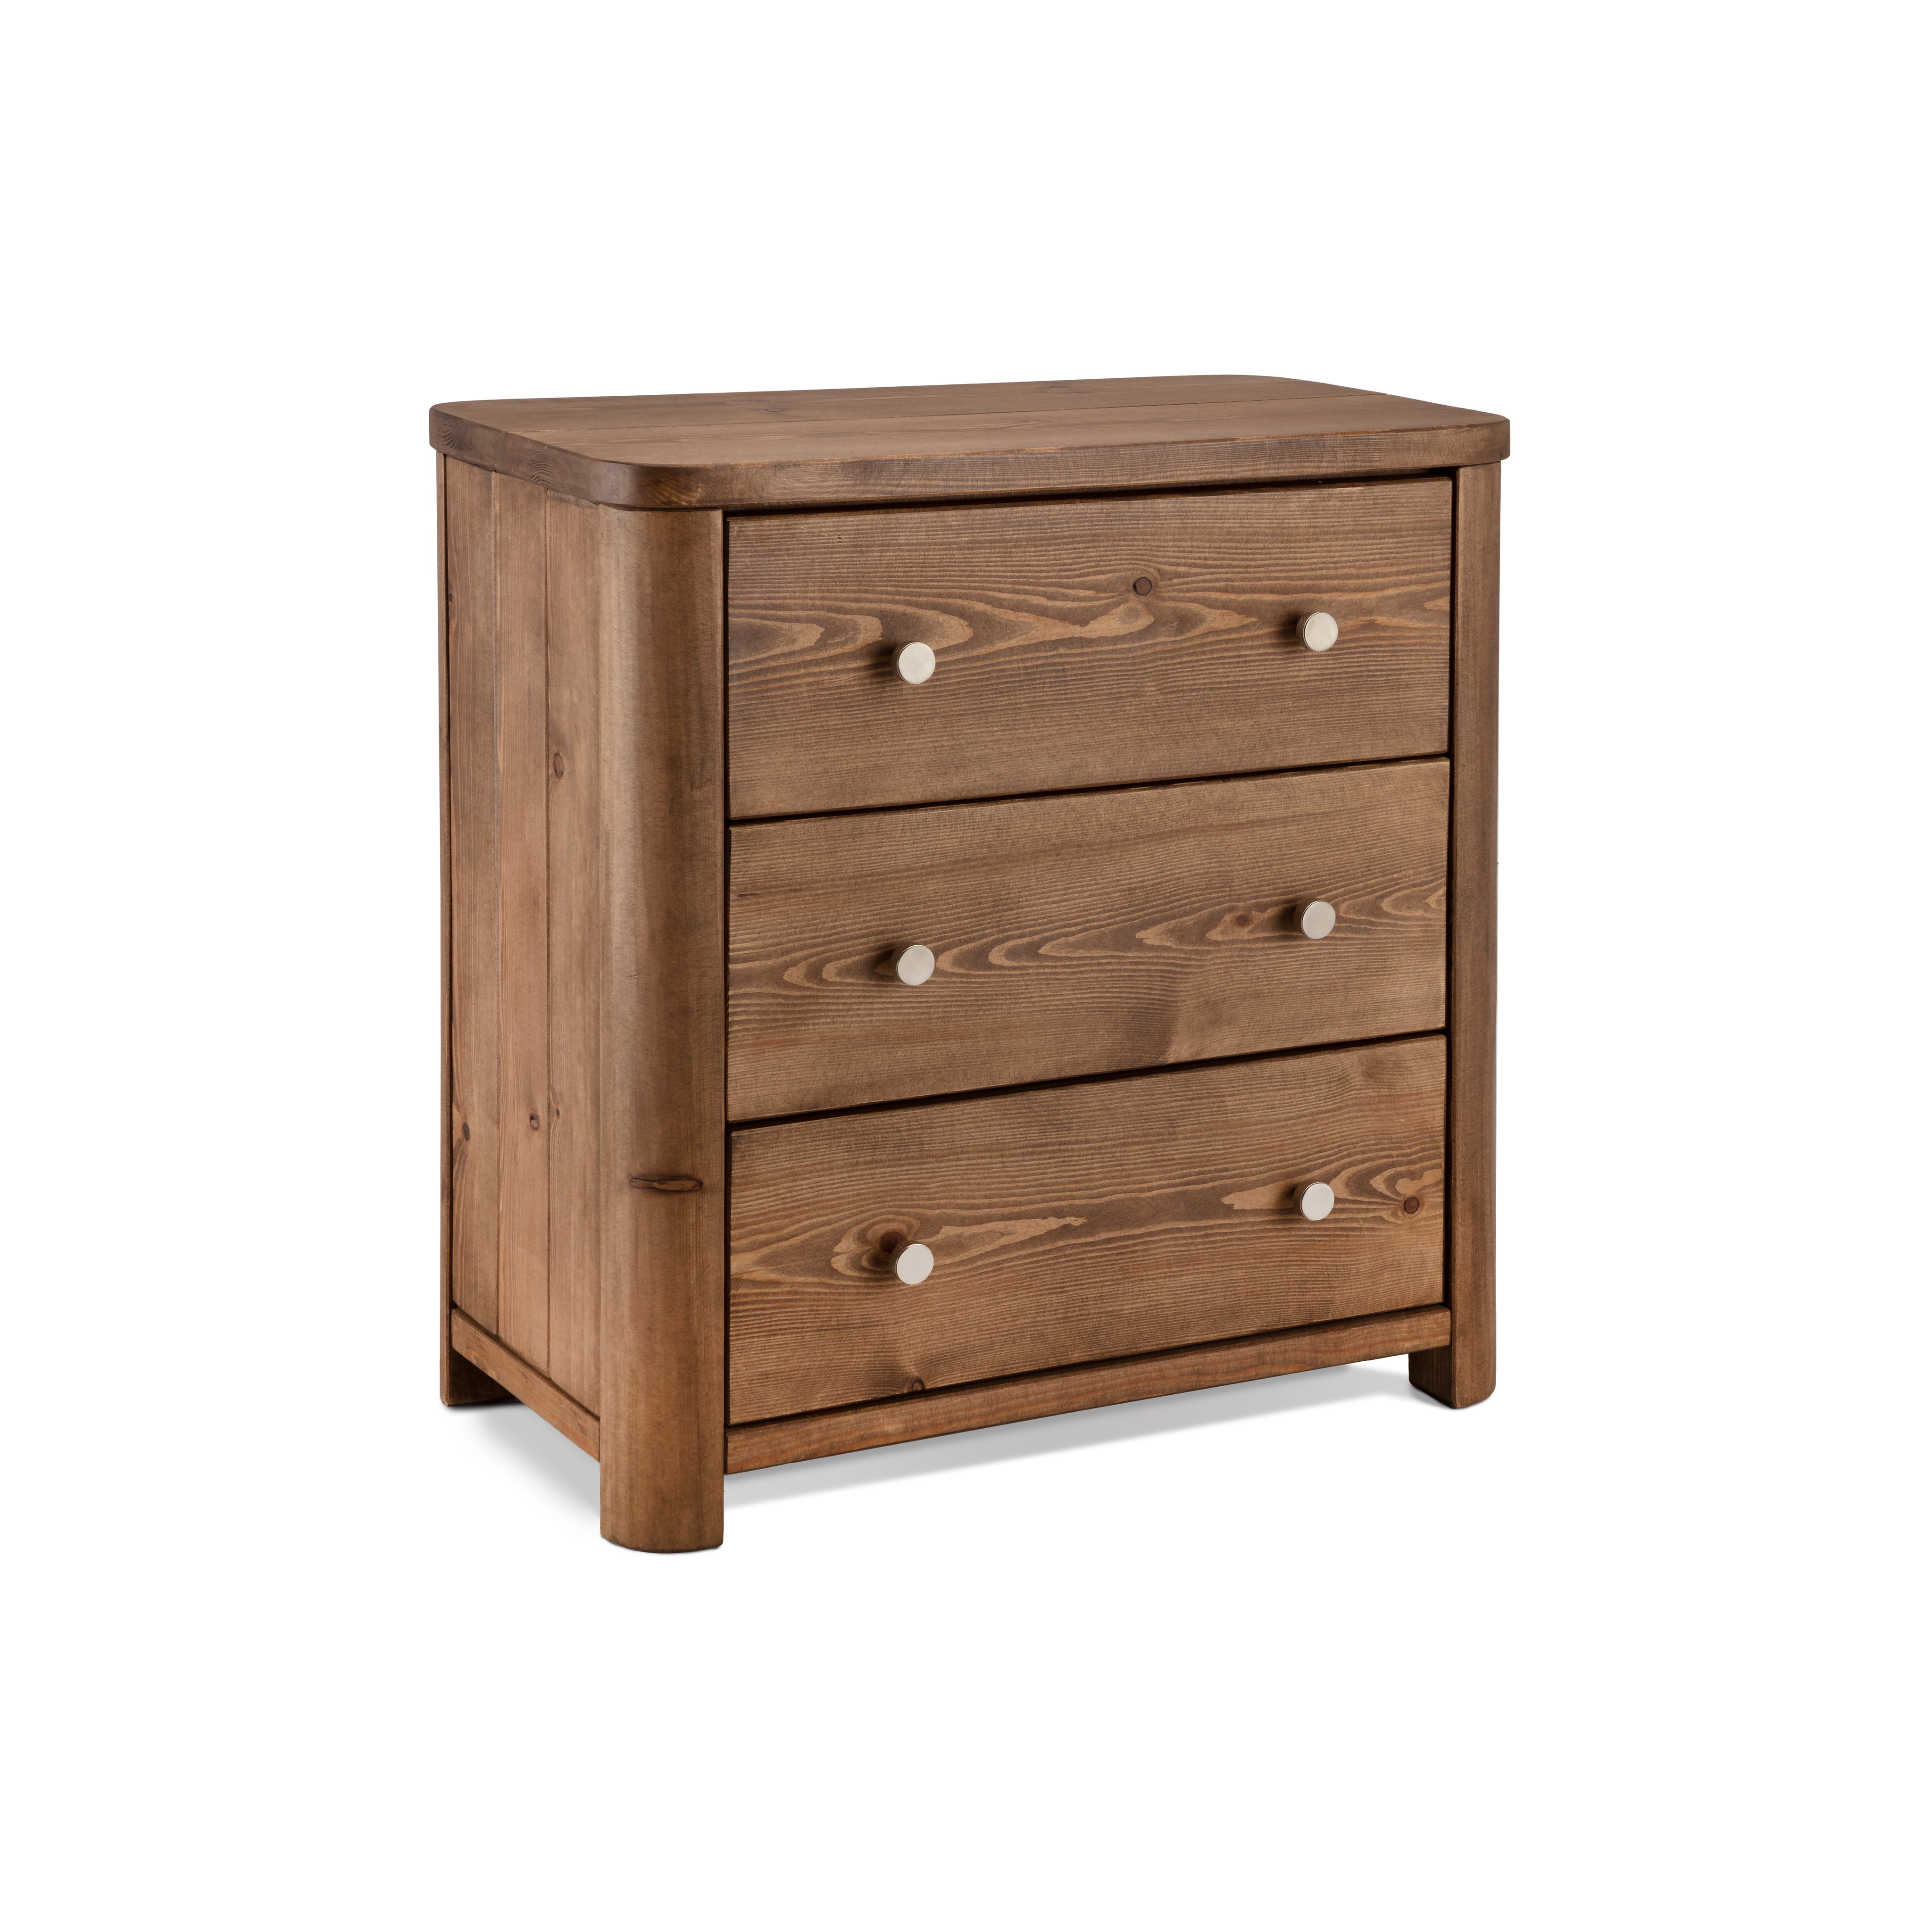 Gosforth Chest Of Drawers